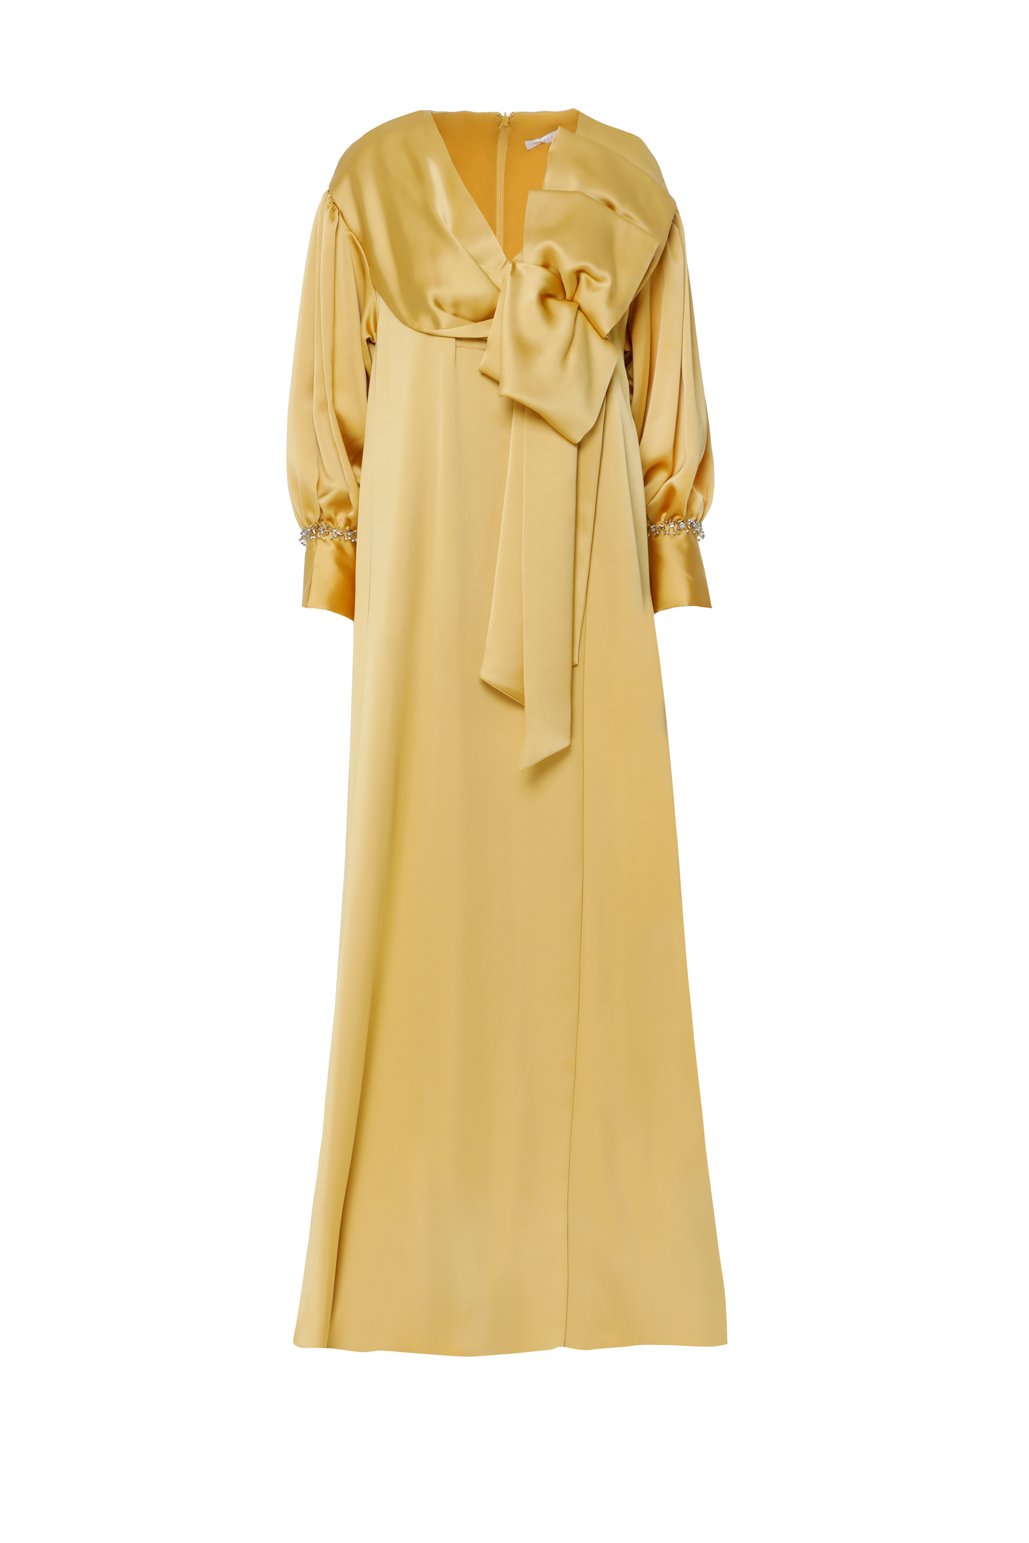 Bow Detailed V Neck Flowy Long Yellow Evening Dress